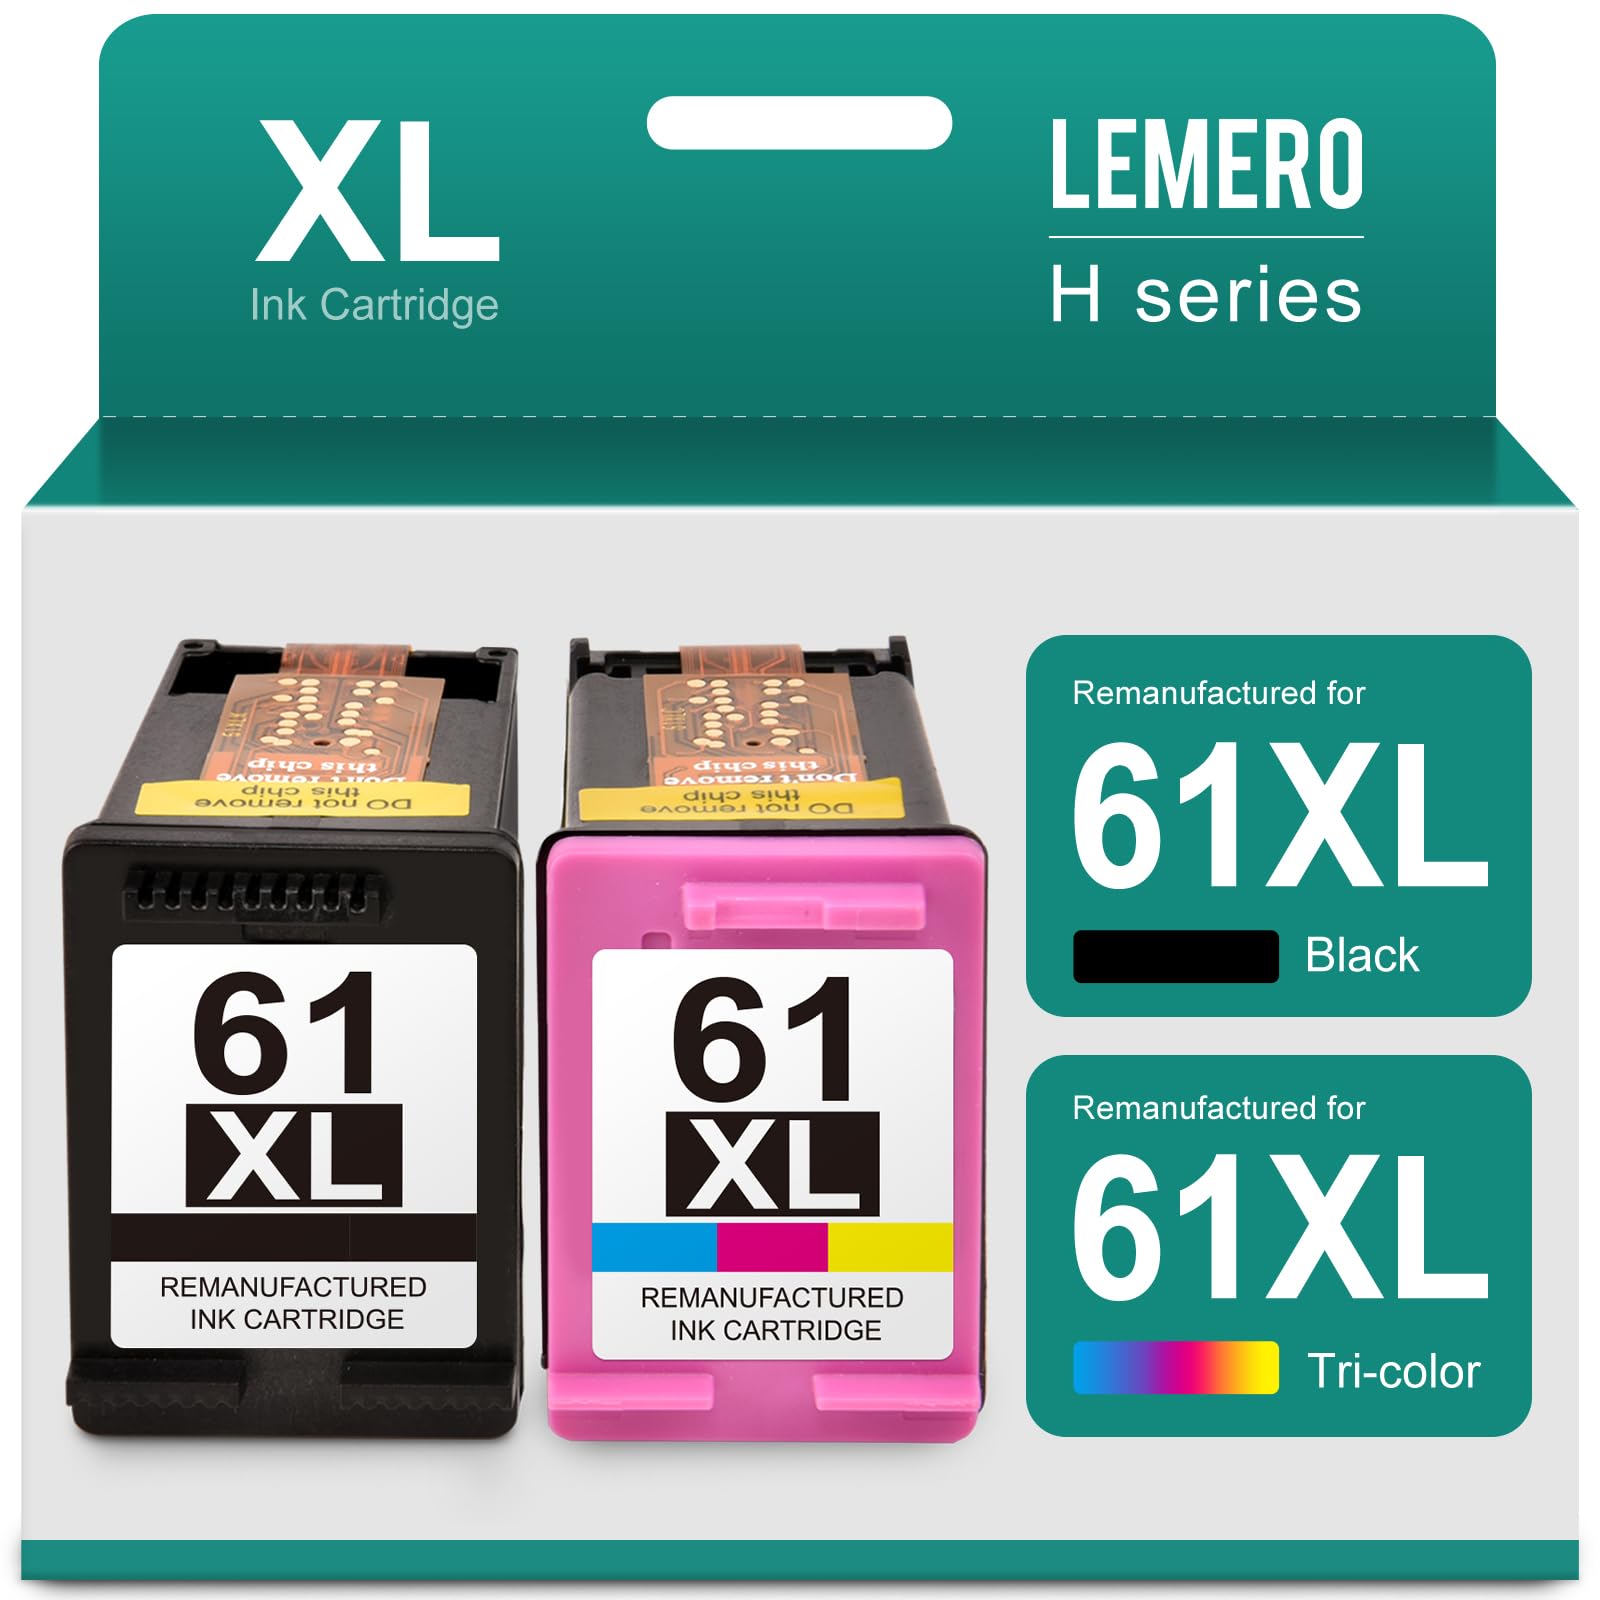 LEMERO HP 61XL Black and Tri-color Ink Cartridges:LEMERO remanufactured HP 61XL ink cartridges in new packaging, displaying one black and one tri-color cartridge, clearly labeled for easy identification.